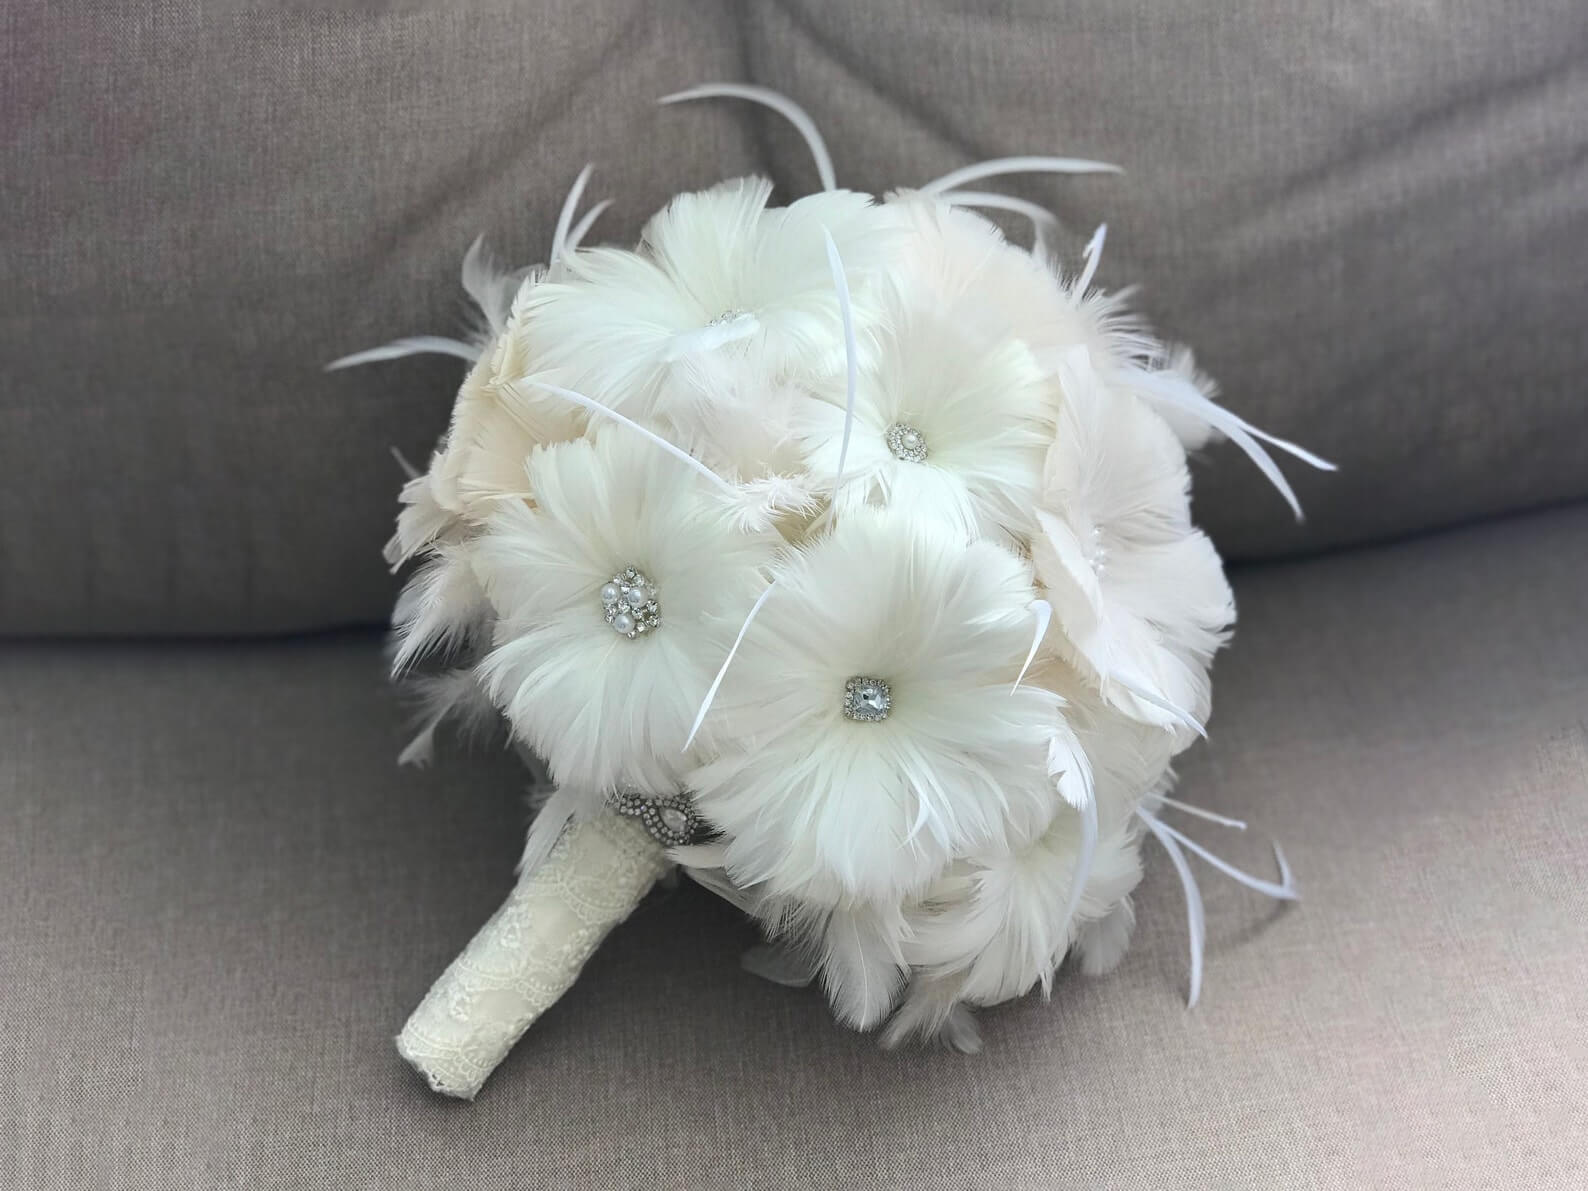 Fun-To-Make White Color Feathered Bouquet For A Wedding : Feather Bouquet Ideas